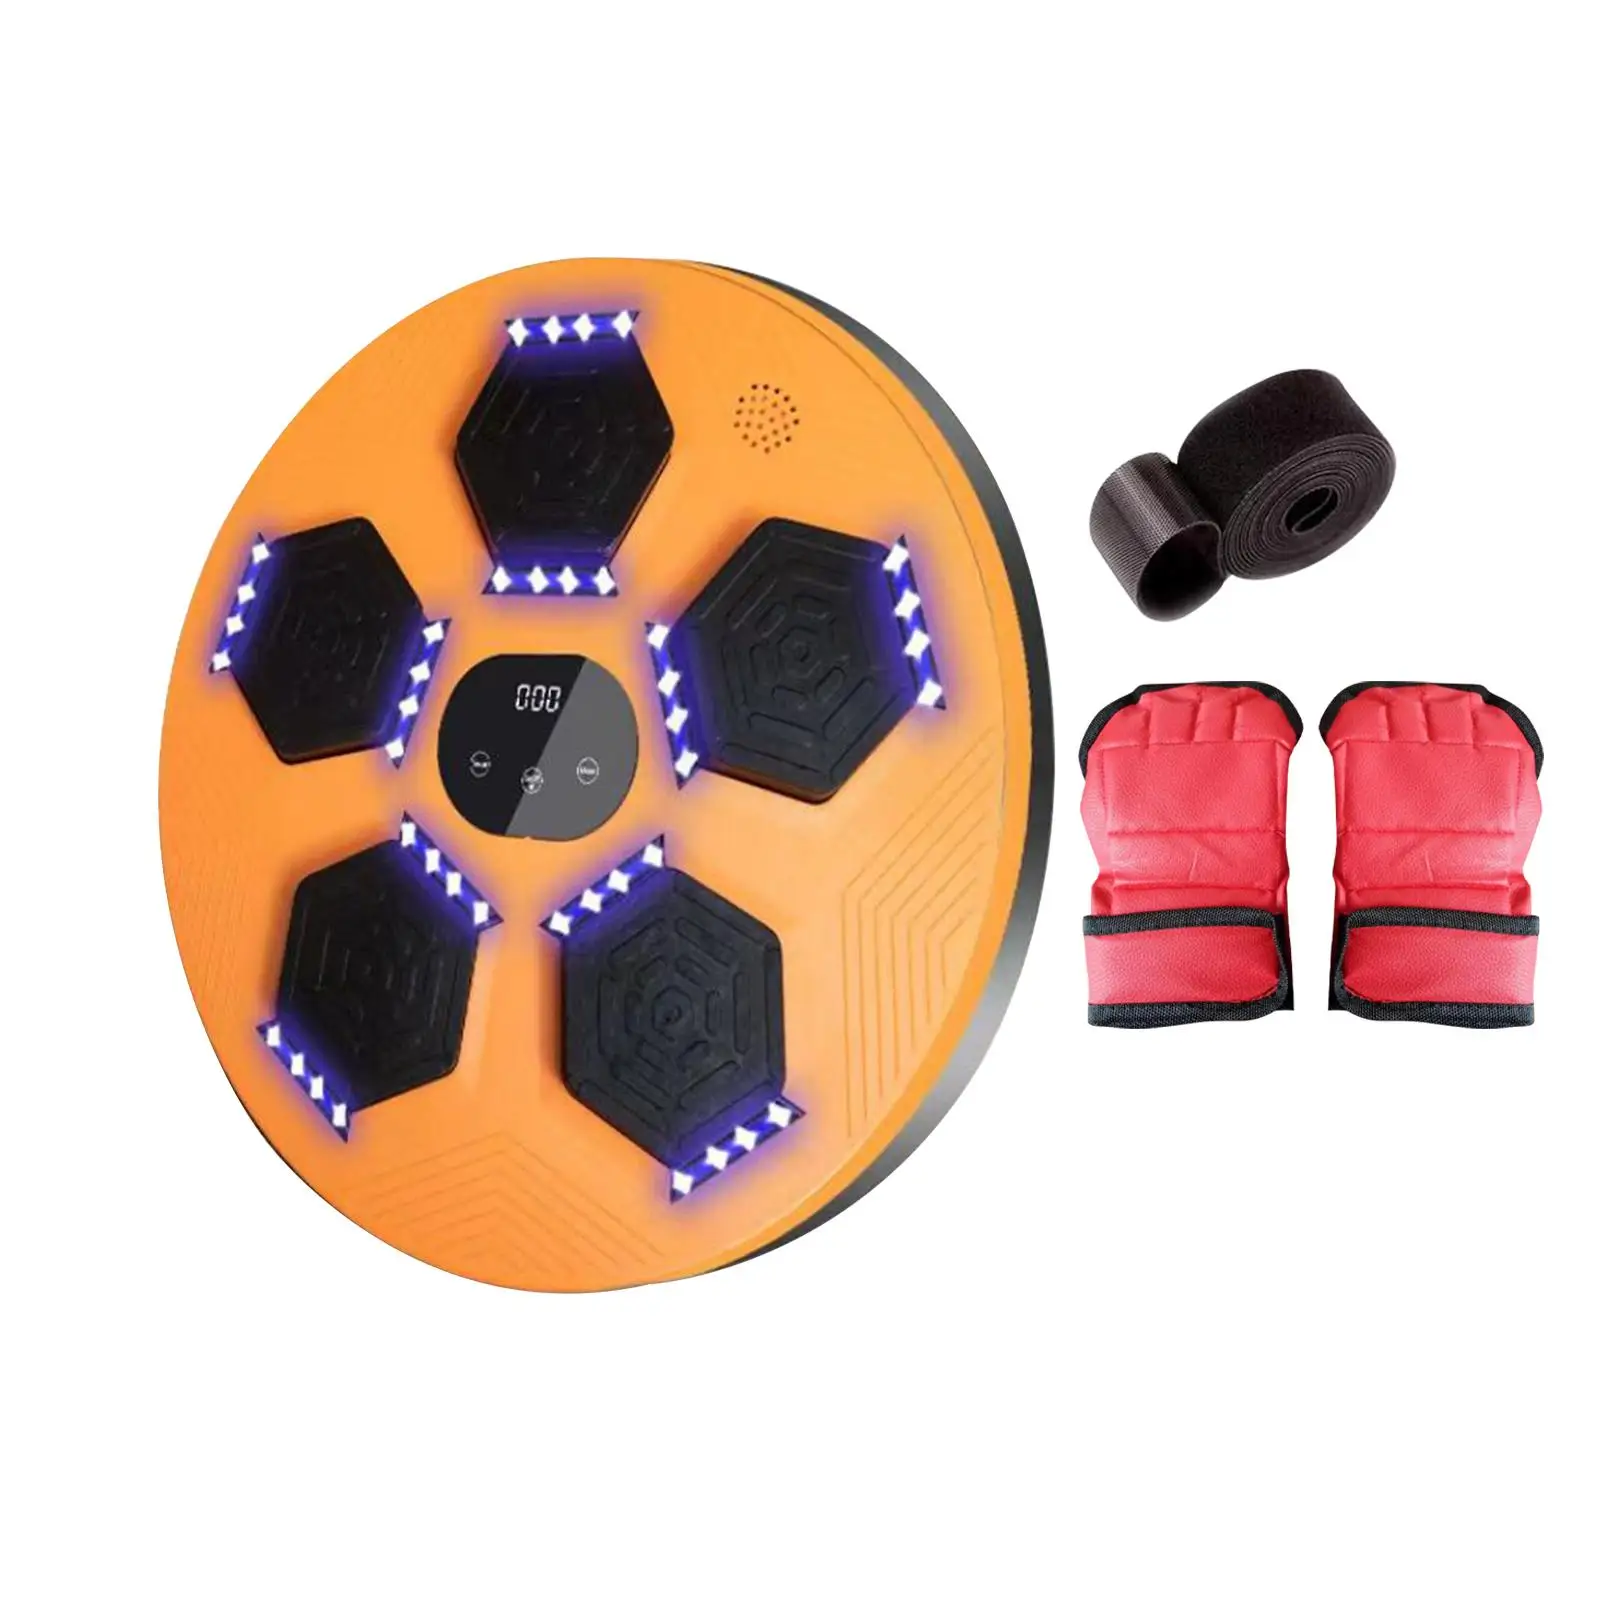 Electronic Boxing Machine Children Digital with Light Speed Adjustable 9 Modes with Gloves Music Boxing Target for Focus